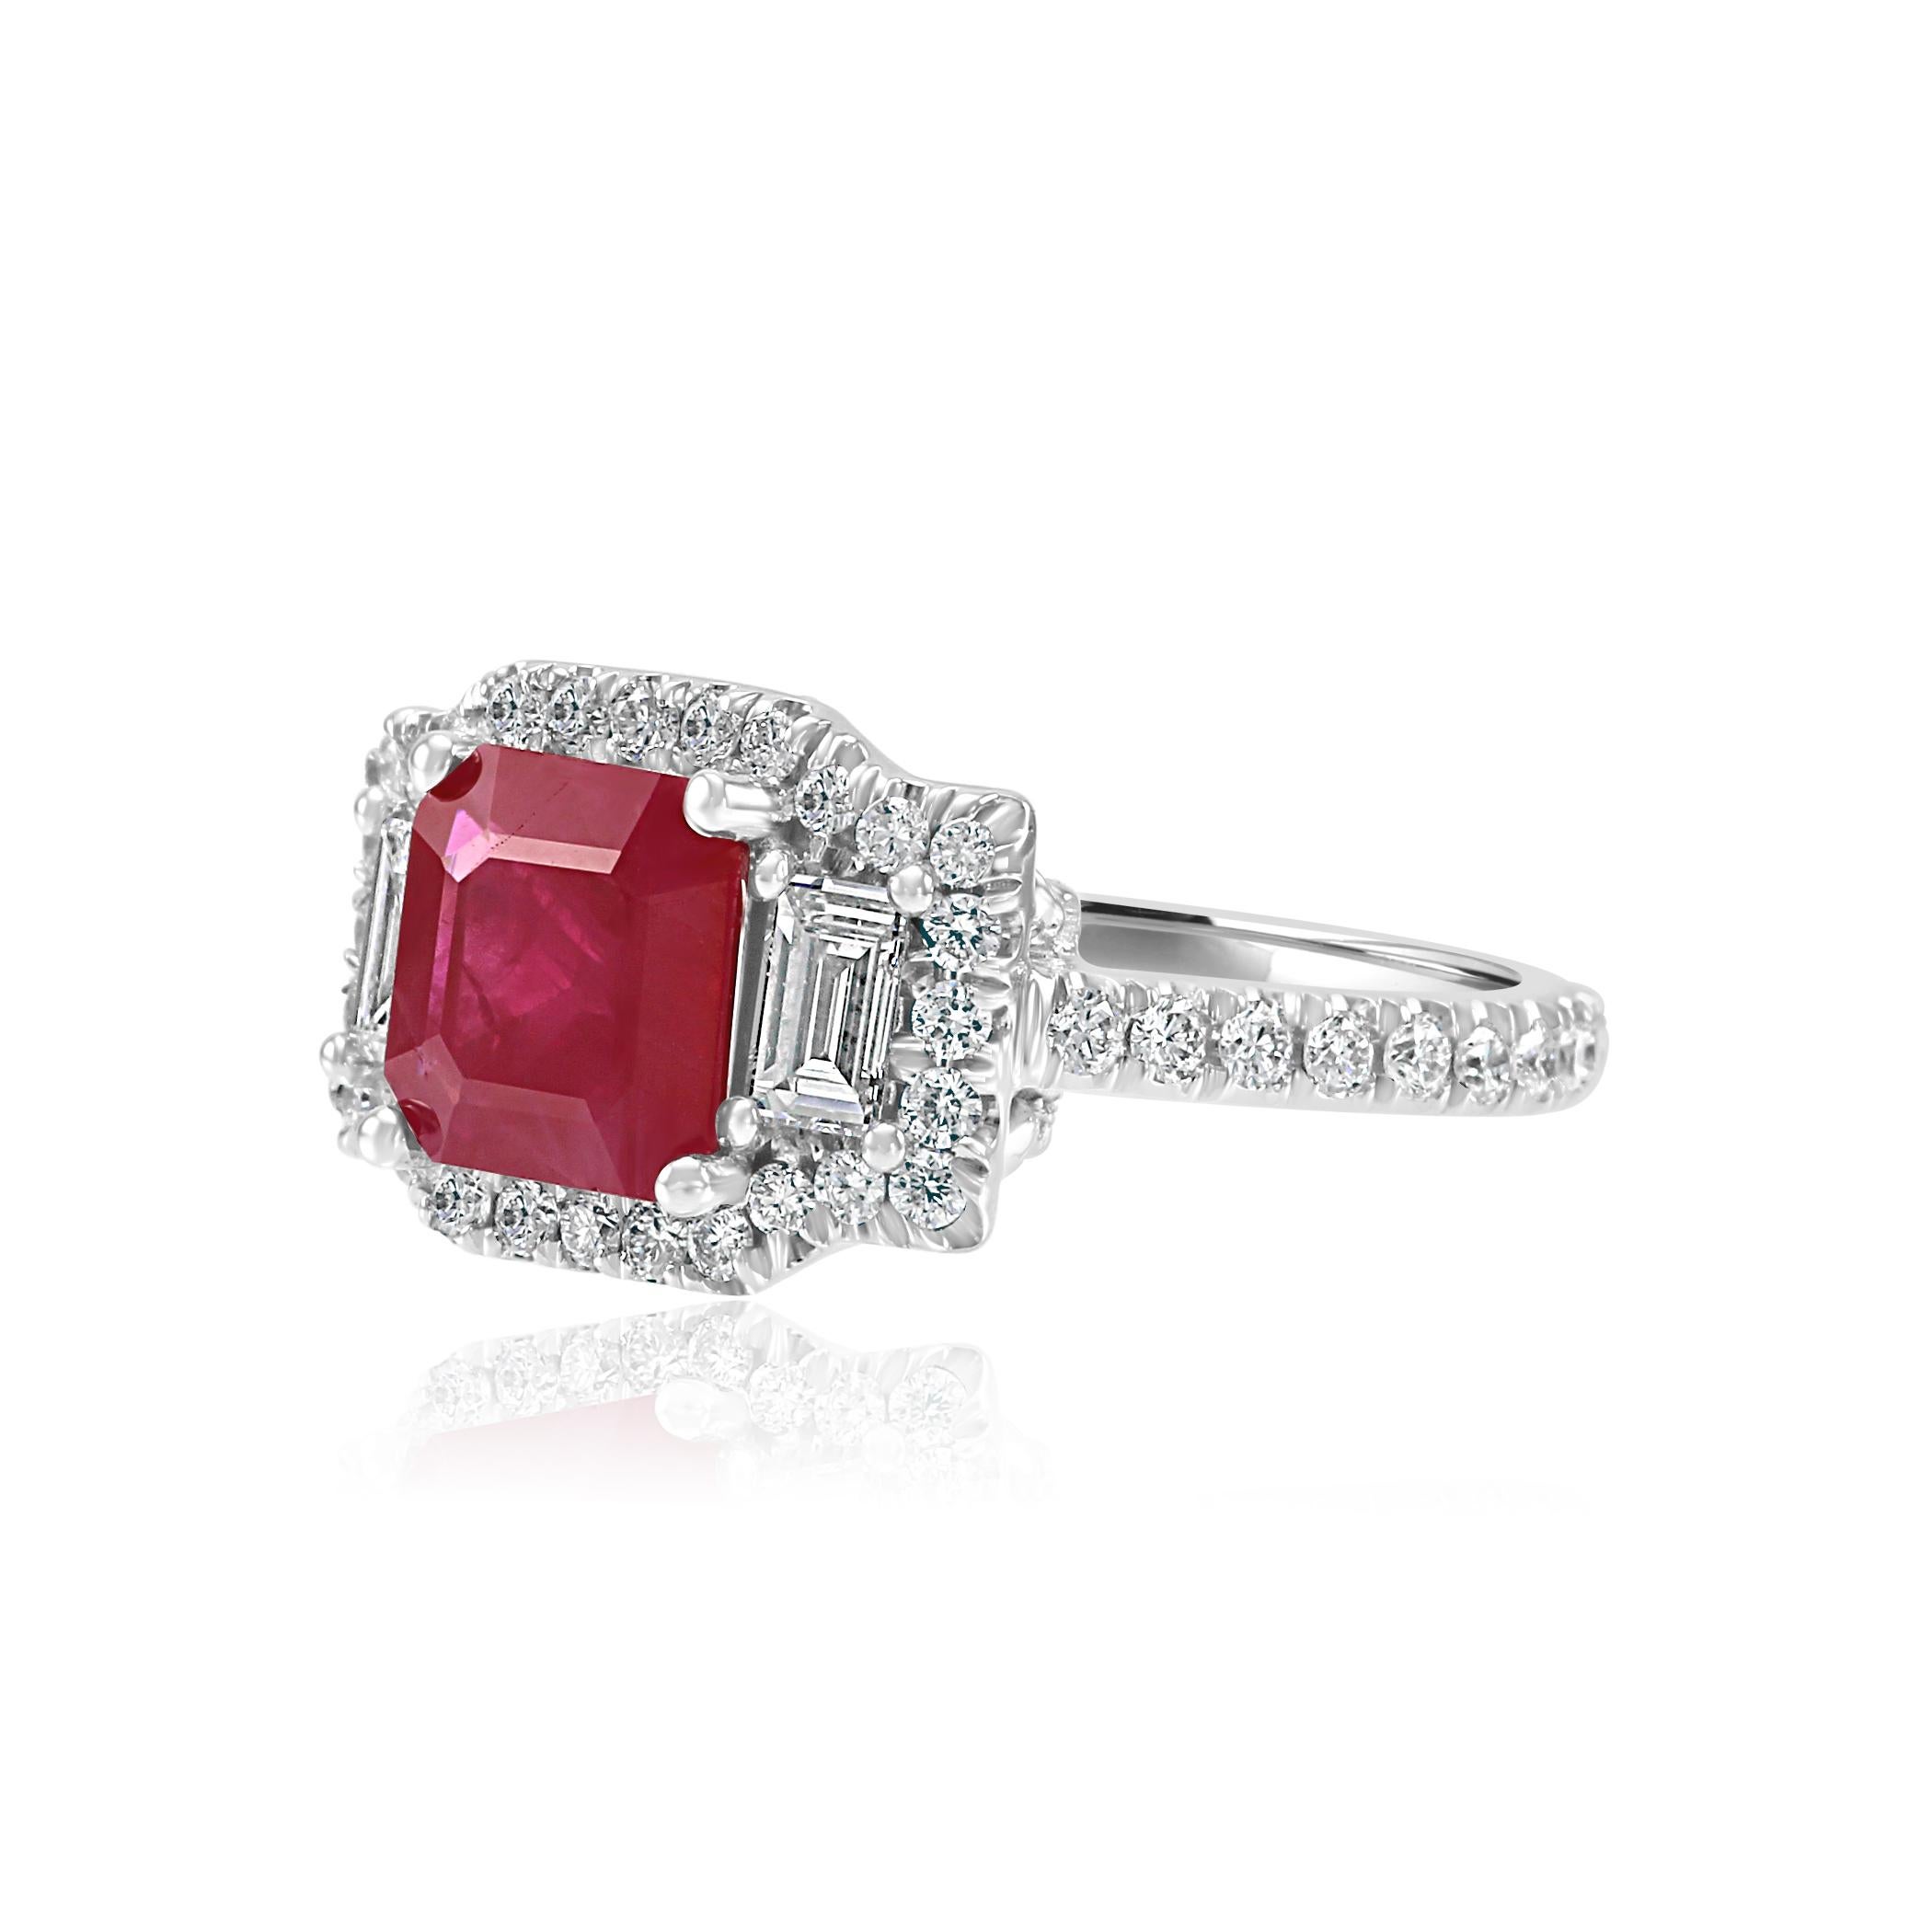 1 Ruby Square Emerald Cut 2.17 Carat encircled in Halo of White Colorless VS-SI Clarity Round Diamond 0.70 Carat Flanked by 2 Colorless VS clarity Baguettes Diamonds 0.30 Carat in 18K White Gold Three Stone  Bridal Fashion Cocktail  ring . 

MADE IN